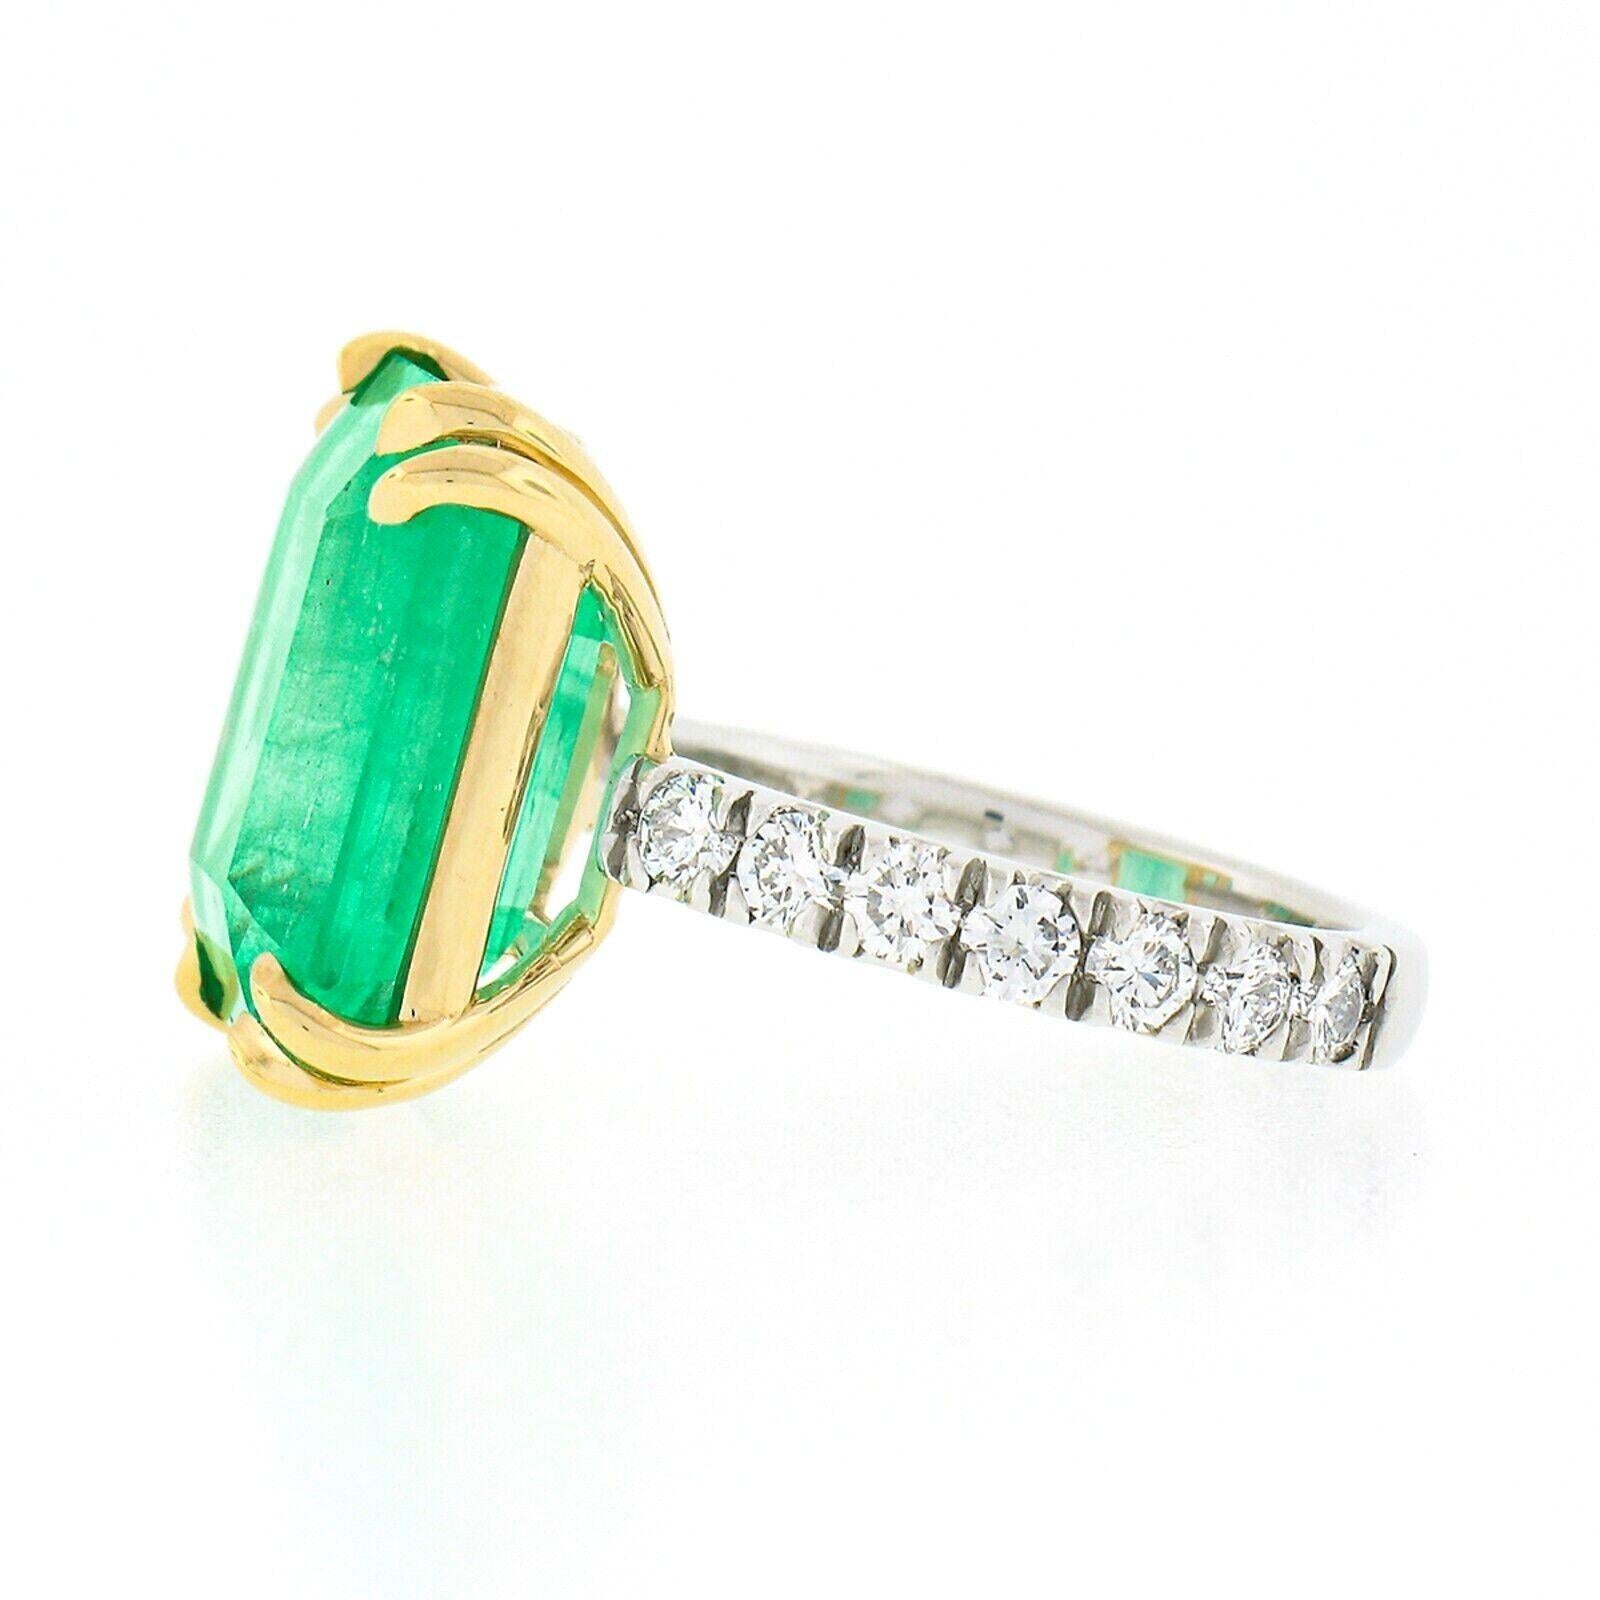 New 18k Gold AGL 10.54ct Colombian Emerald Cocktail Ring w/ Pave Diamond Shank In New Condition For Sale In Montclair, NJ